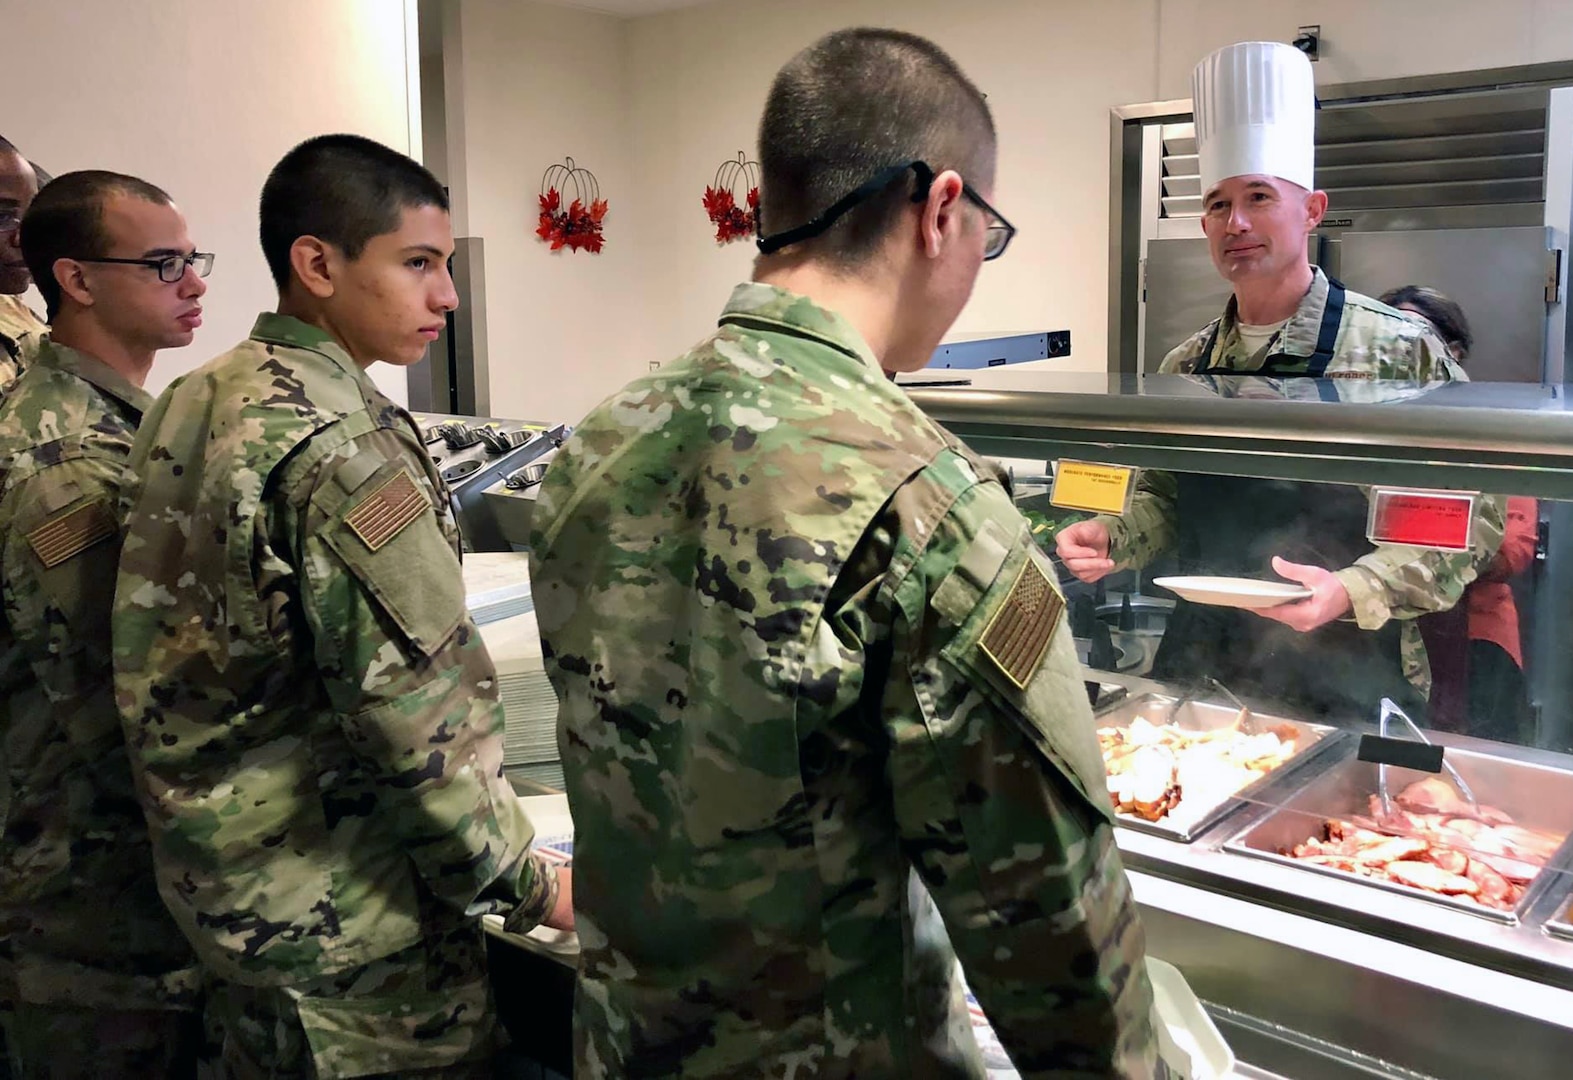 Chief Master Sgt. Stefan Blazier, 37th Training Wing command chief, works the chow line at Thanksgiving dinner for Airmen in basic training at Joint Base San Antonio-Lackland Nov. 28.